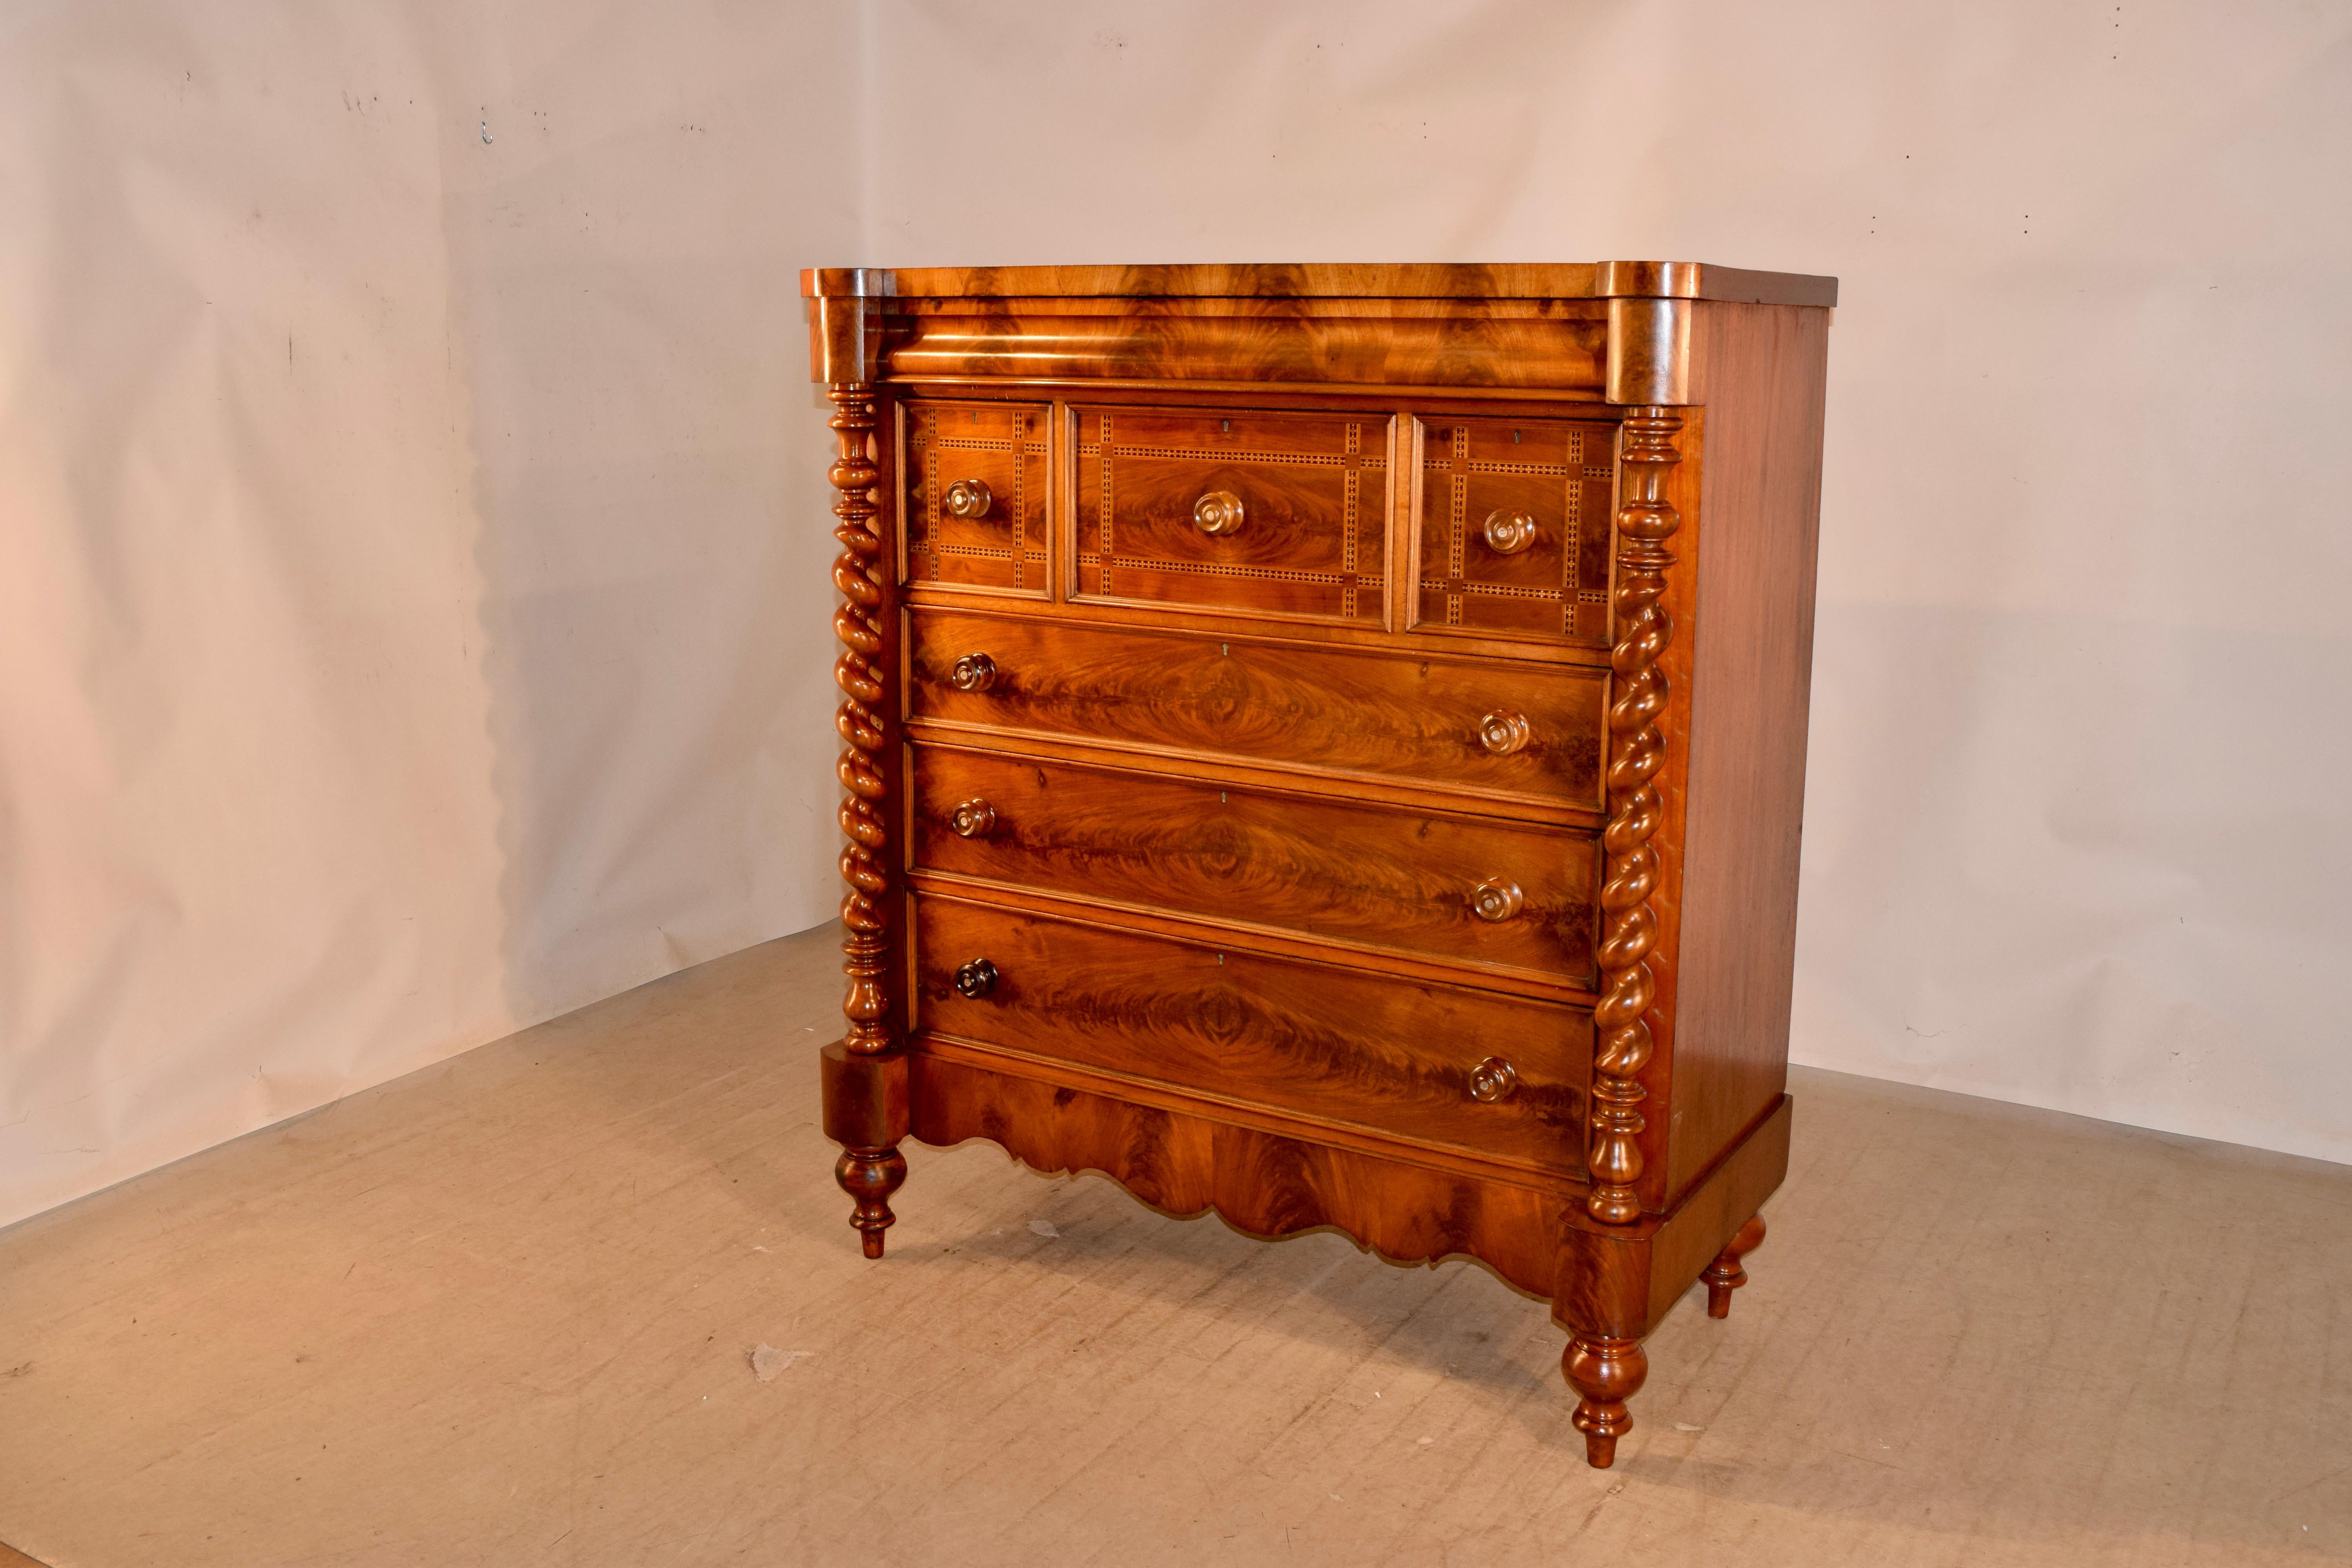 19th century large mahogany chest of drawers from Scotland with a shaped top, following down to simple, elegant sides and a hidden top drawer in the molding, over three inlaid banded drawers over three larger drawers, which are flanked by hand